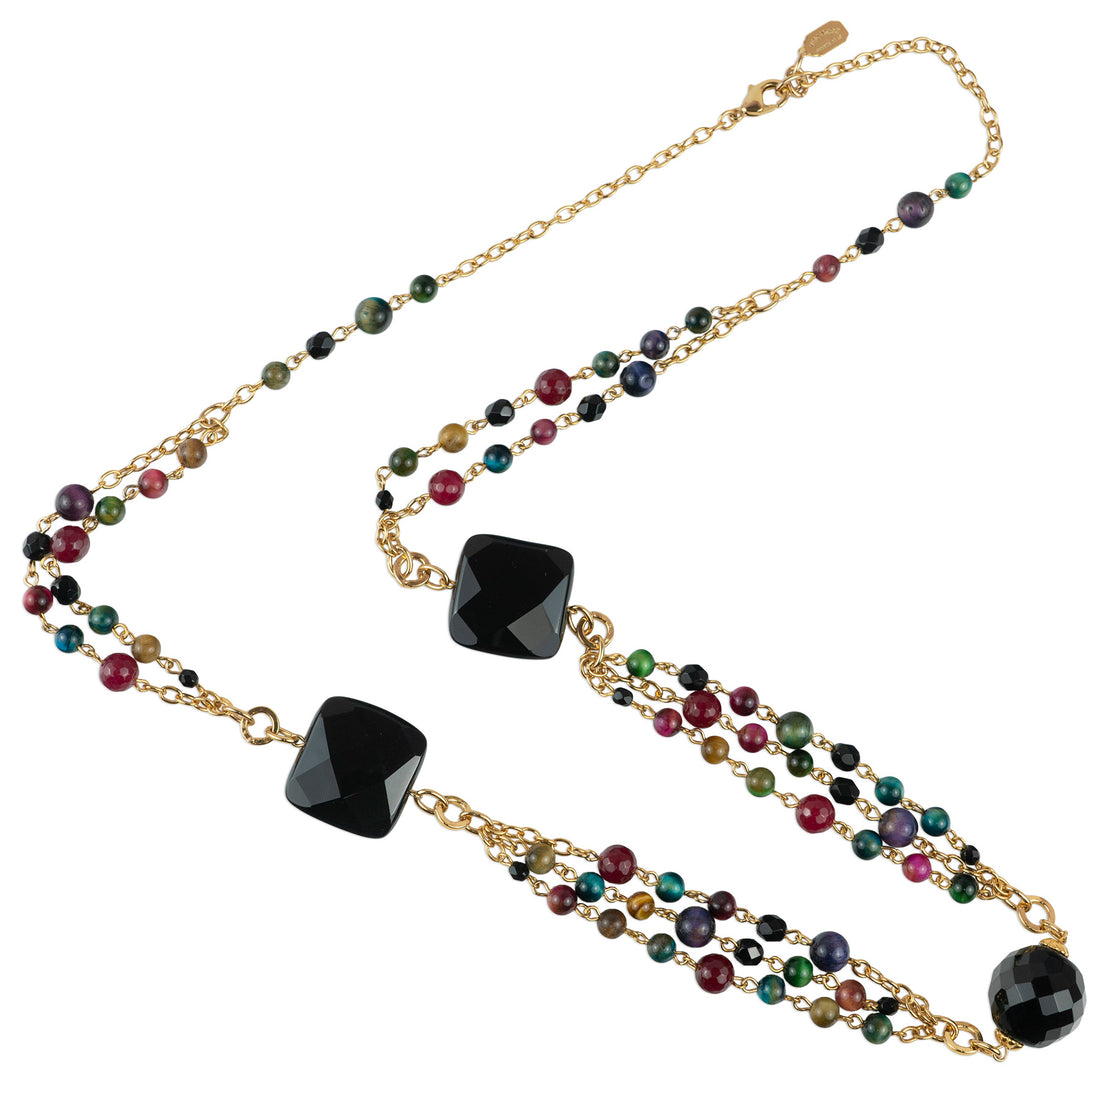 Long multi-strand necklace with semi-precious stones and crystal